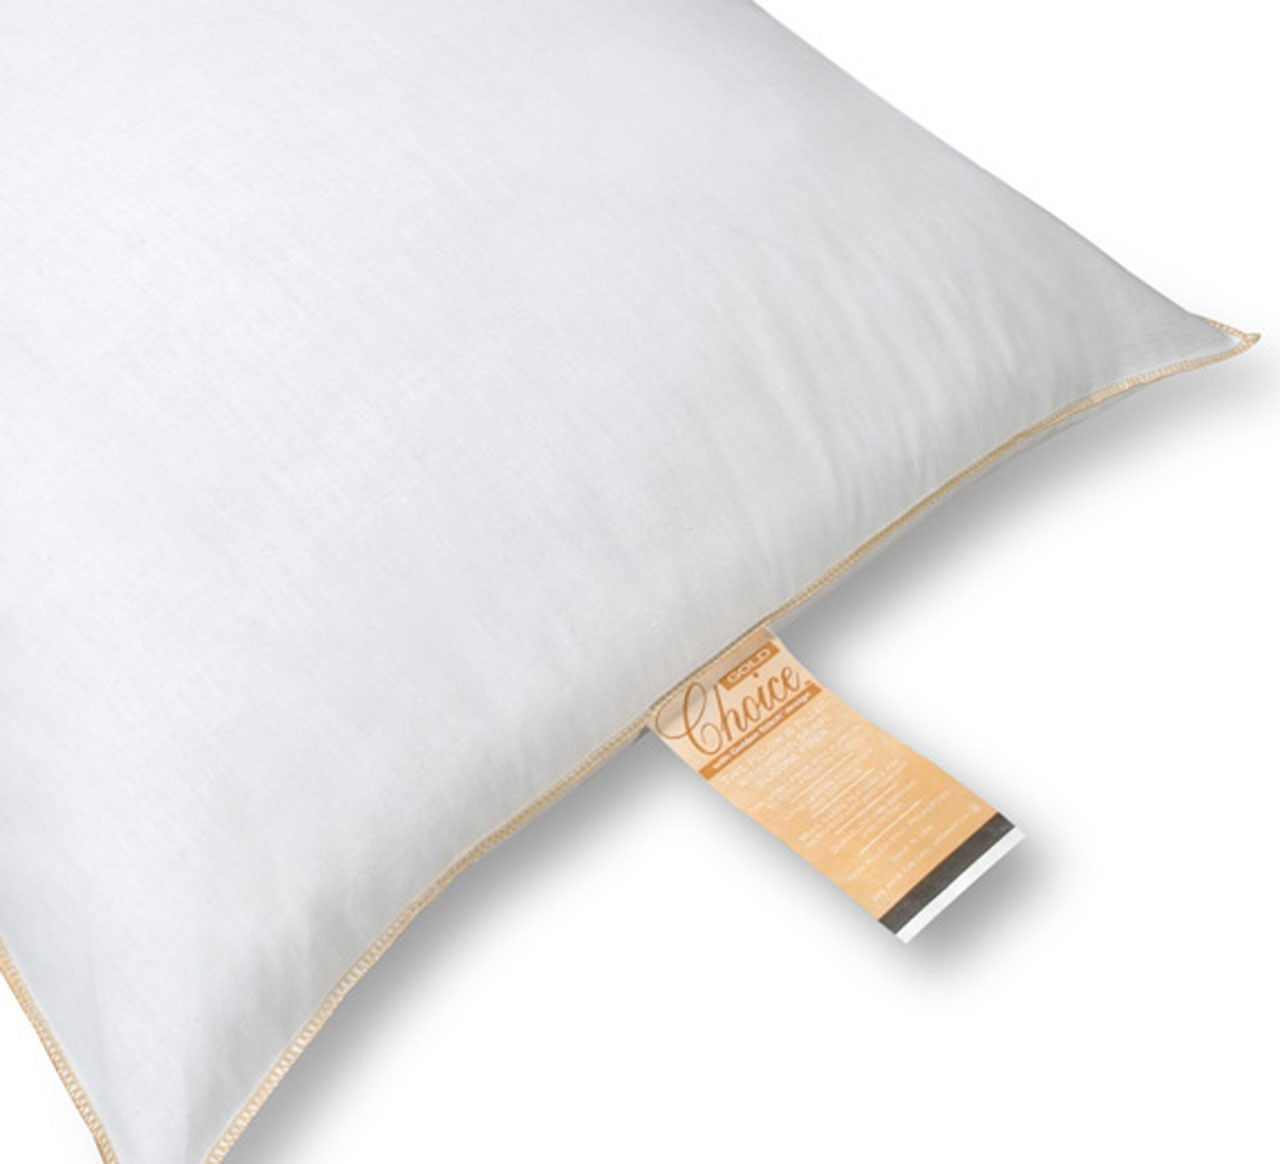 What does the outer appearance of the Super Gold Choice Pillows look like?